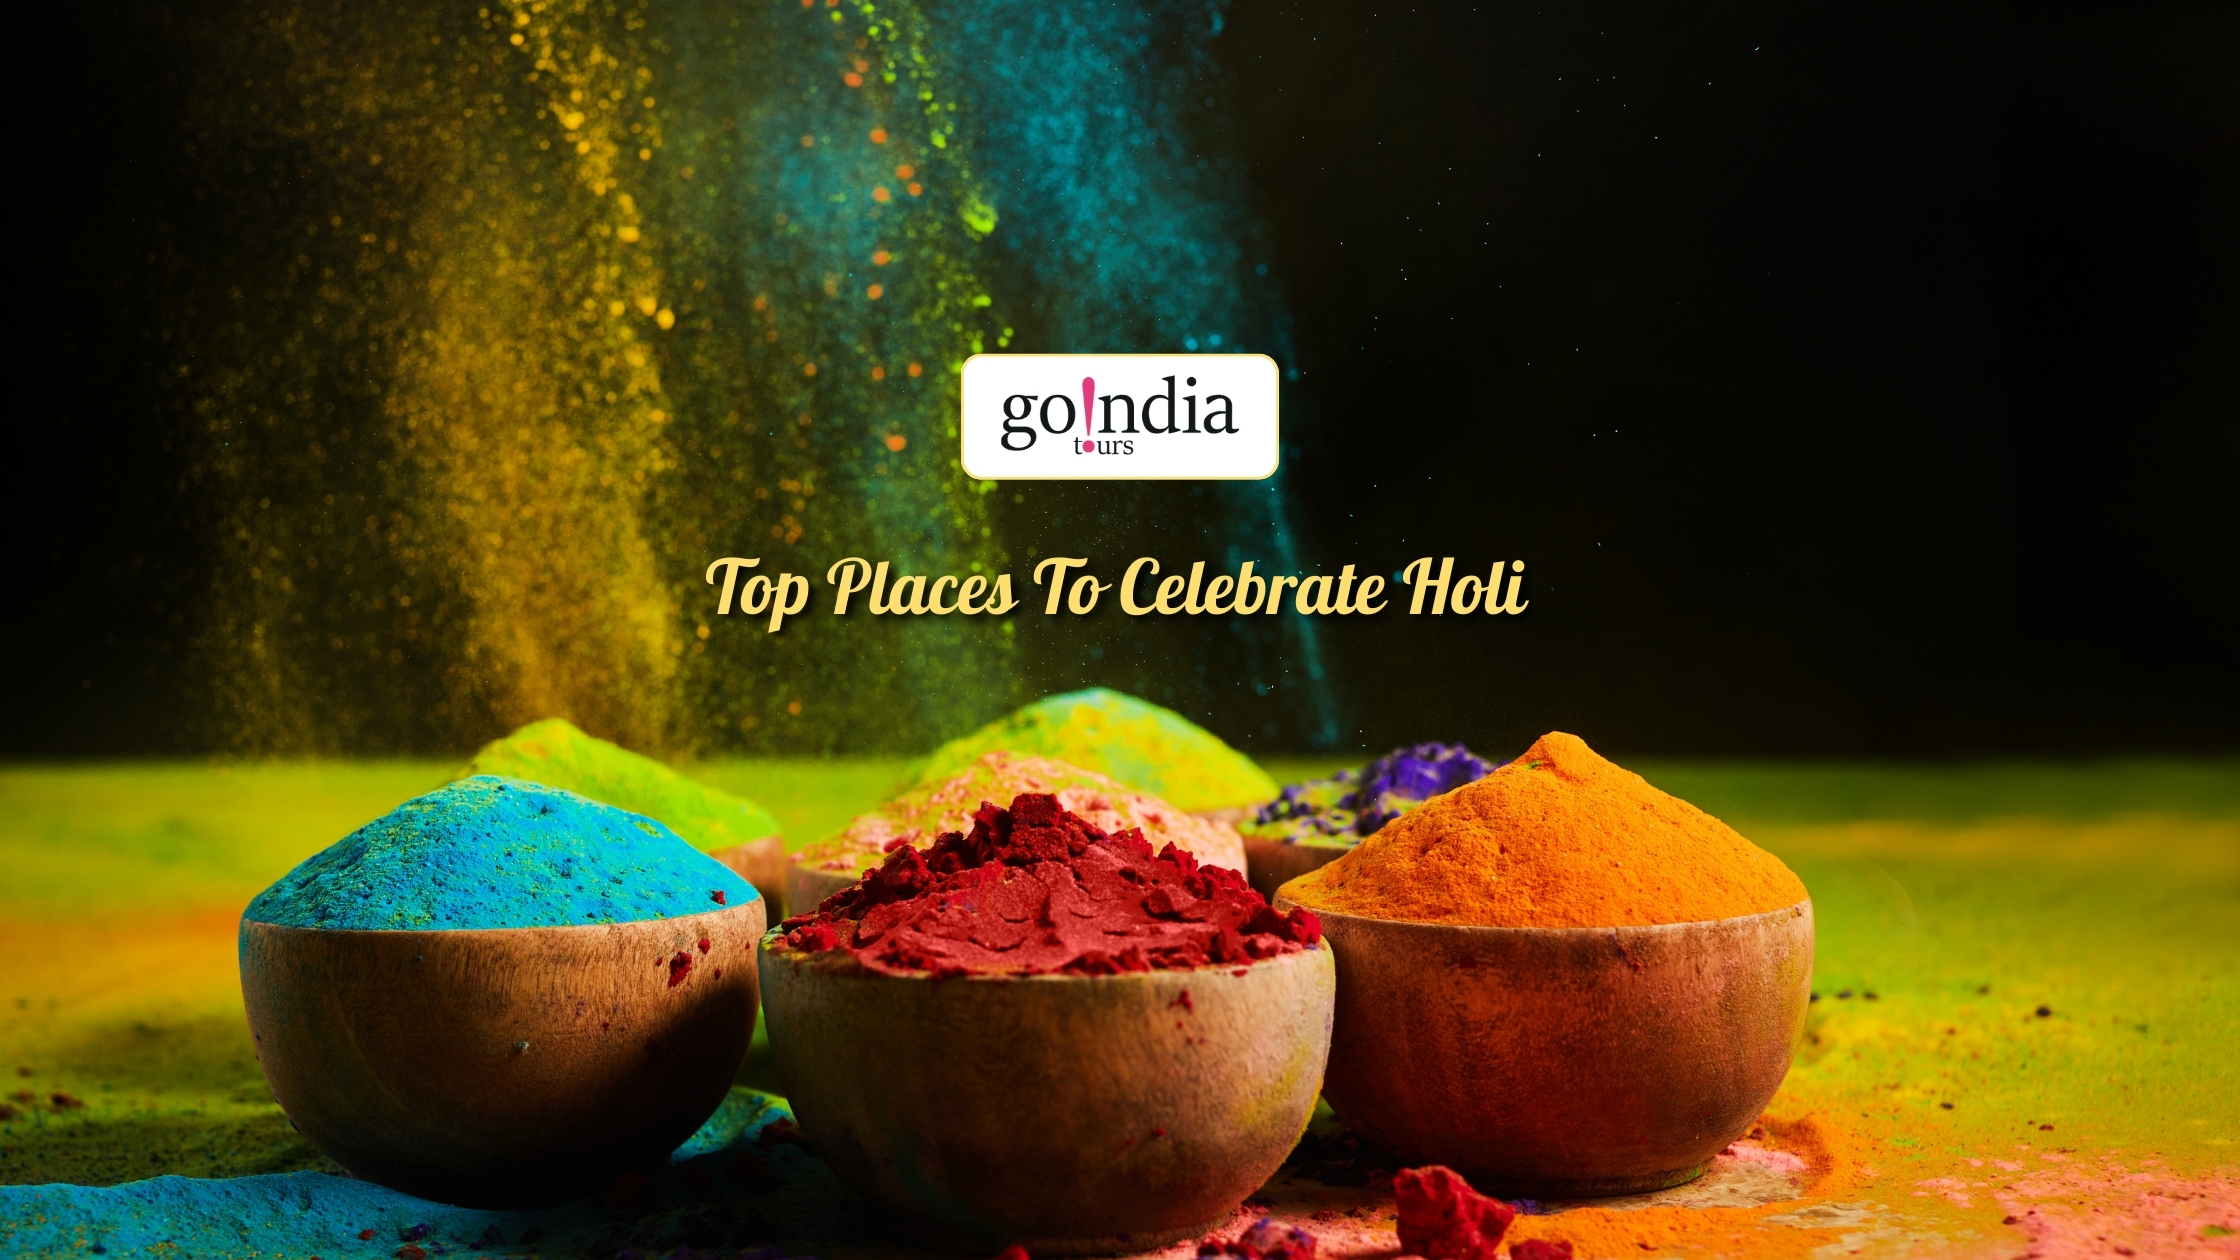 Top Places To Celebrate Holi